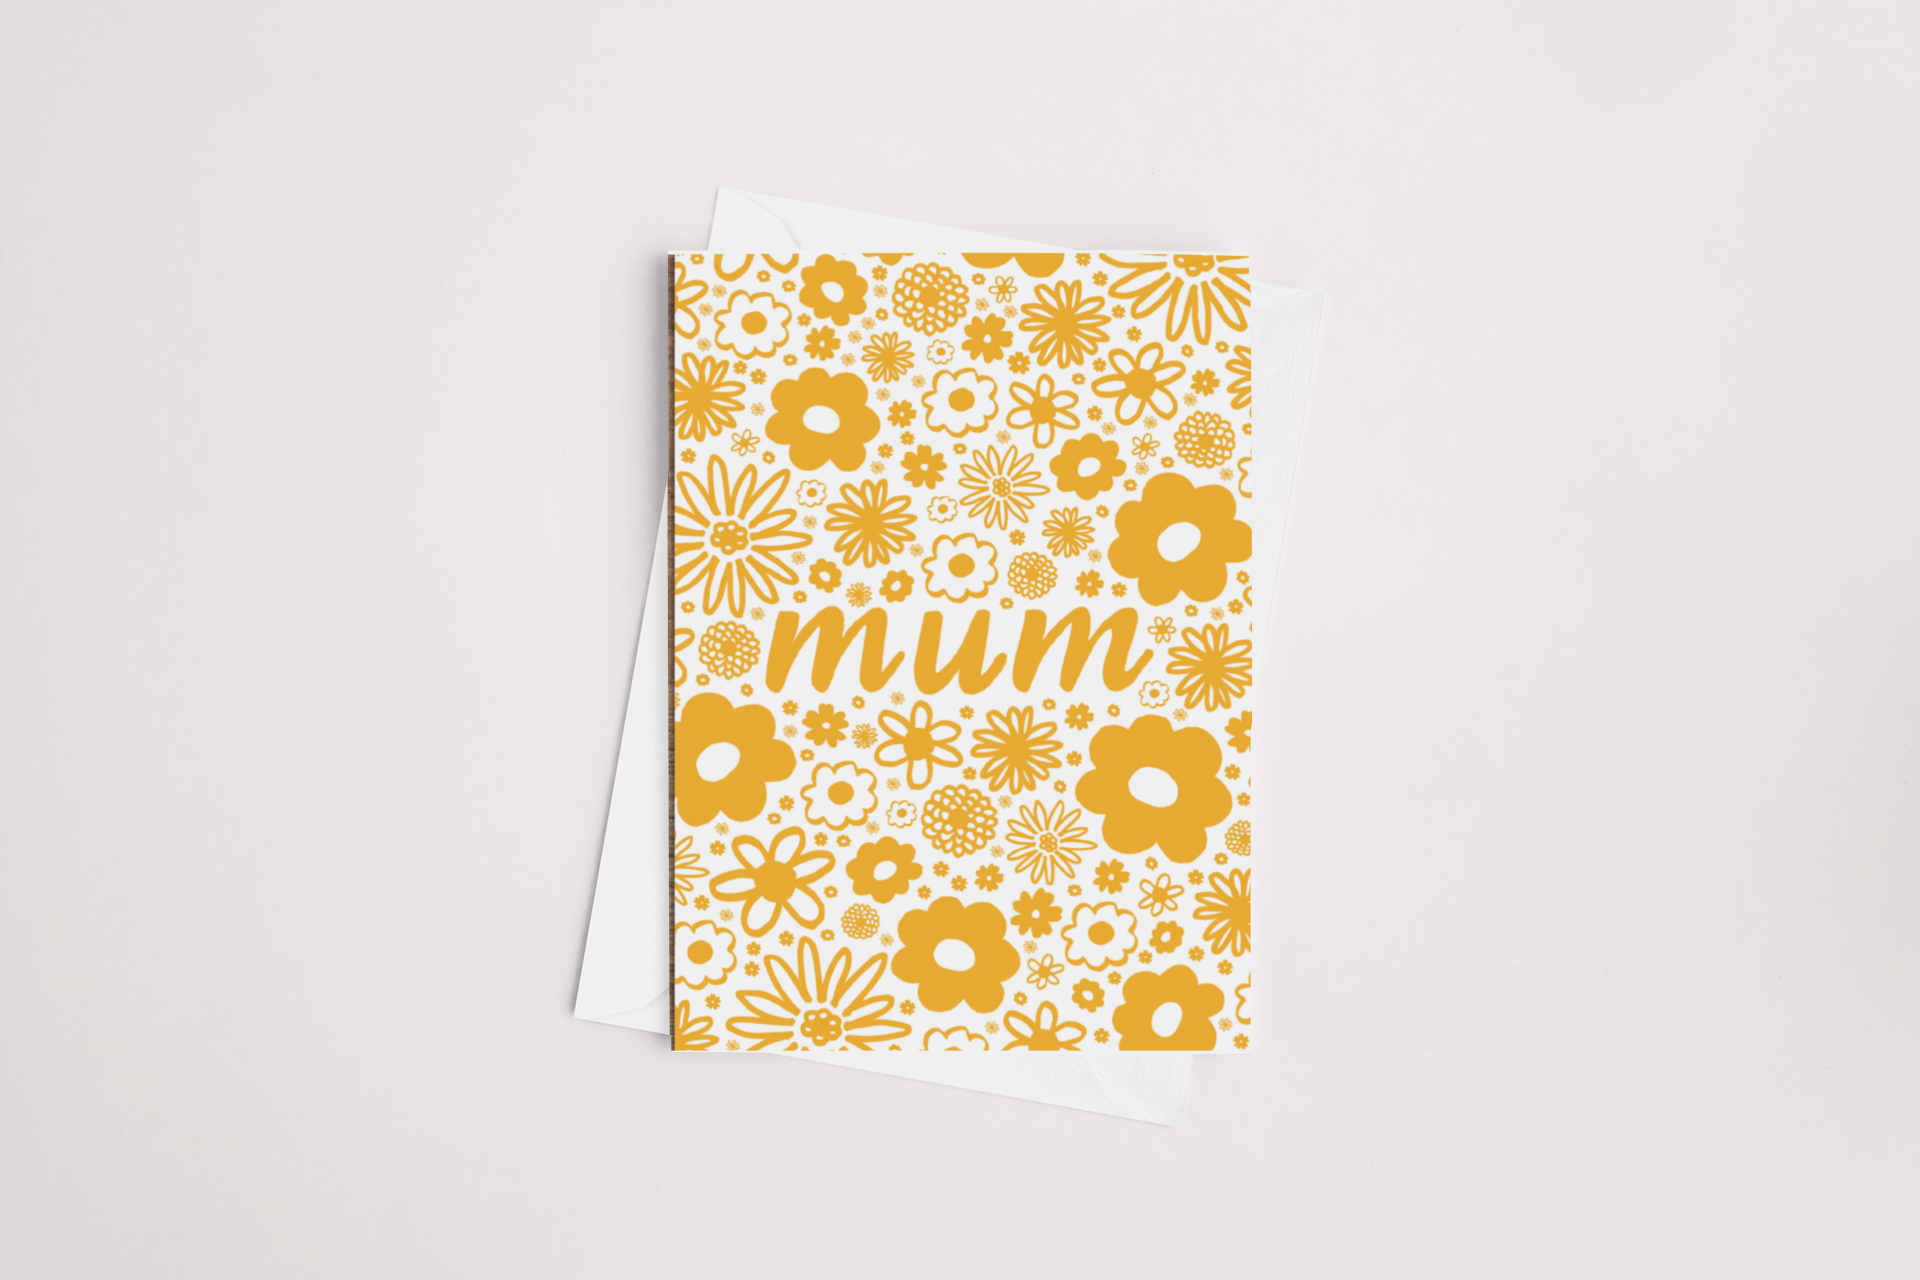 A Tuesday Print Retro Mum Mother's Day Card on a white background with a vibrant yellow floral design and the word "mum" in the center.